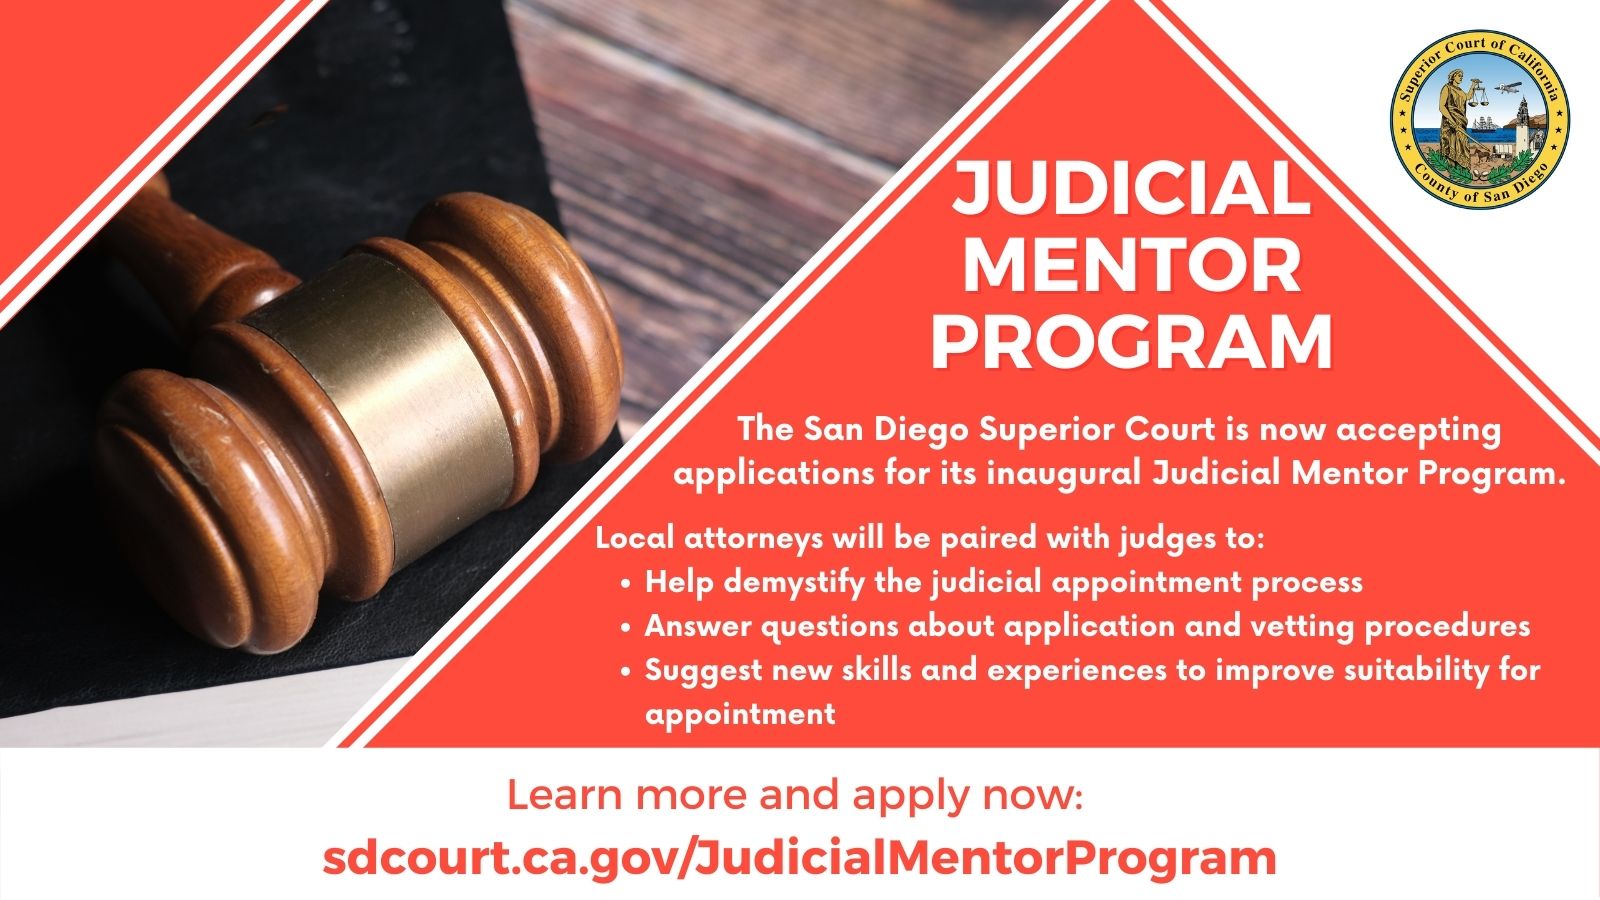 San Diego Superior Court Launches Judicial Mentor Program to Support